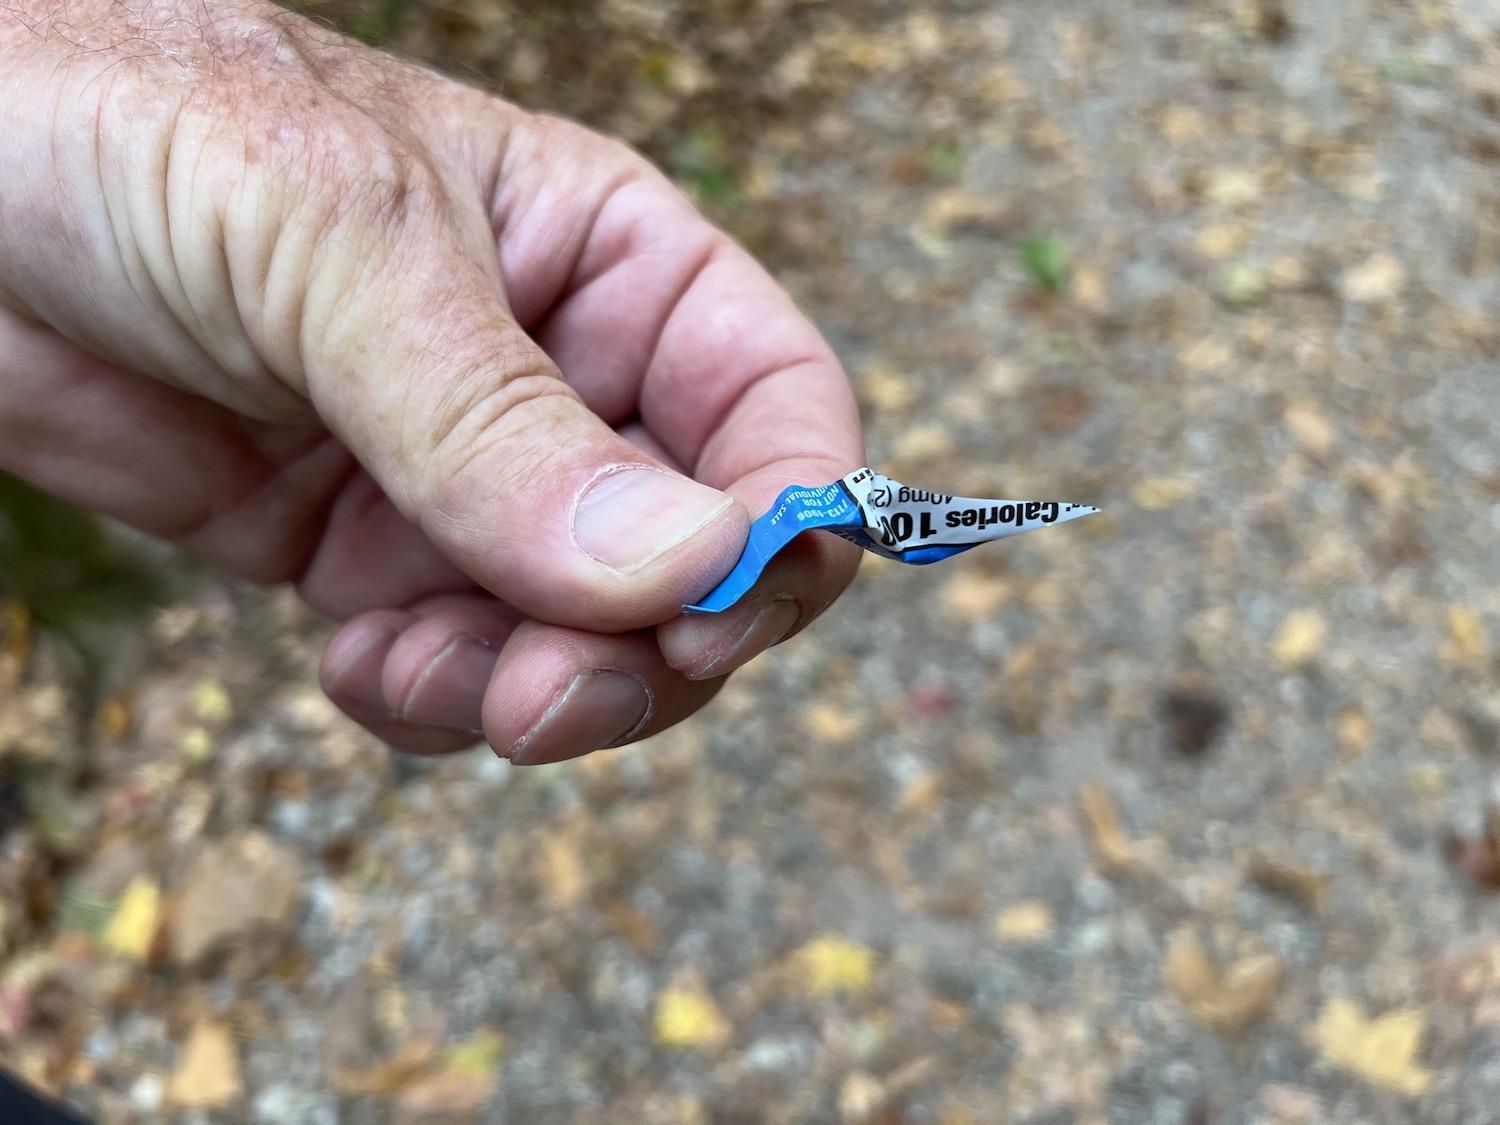 Mike Mills collects microtrash, usually the tiny end of a wrapper.